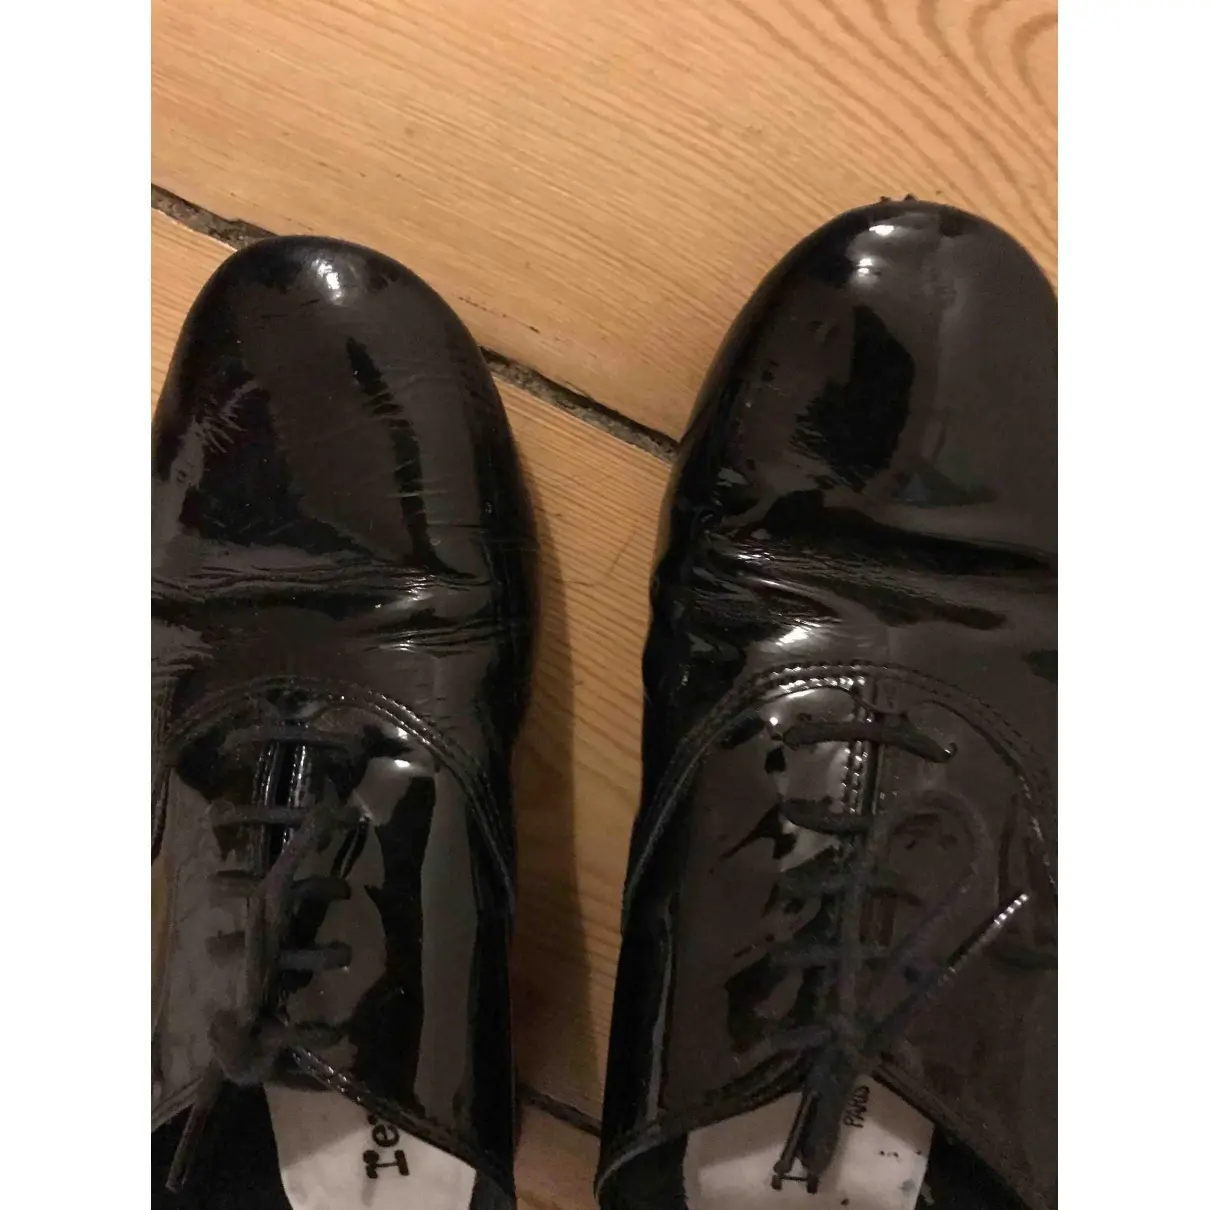 Buy Repetto Patent leather lace ups online